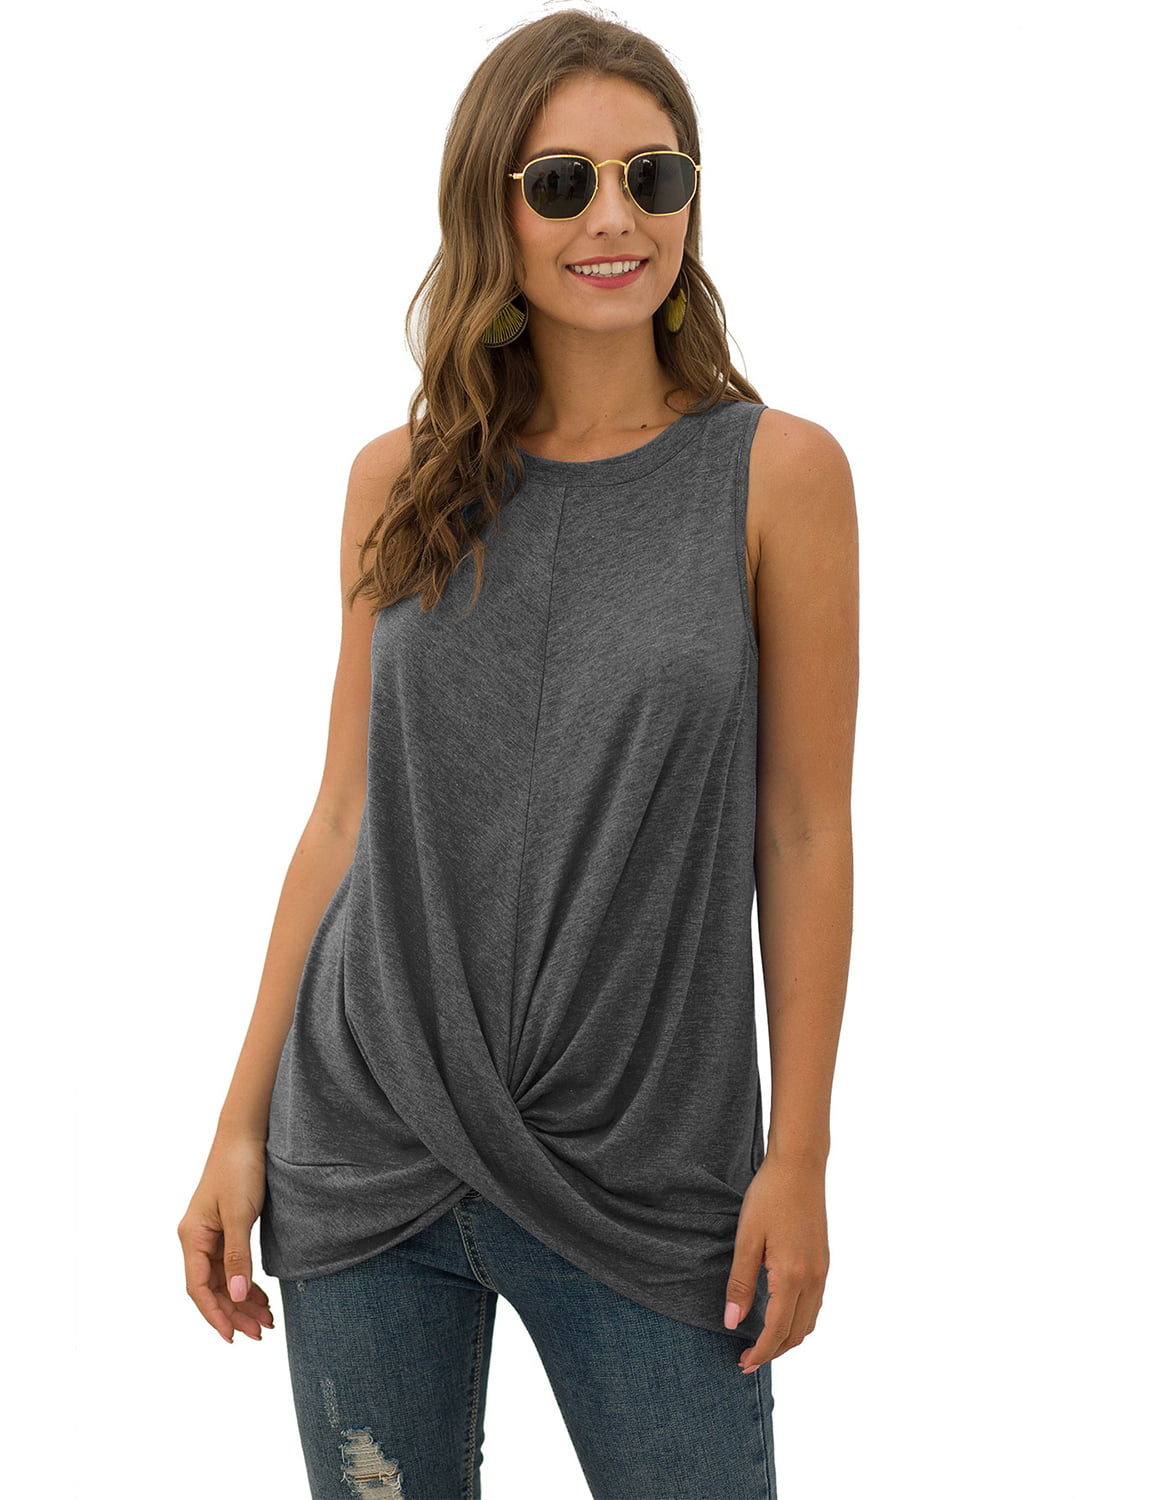 Women's Casual Tank Top Round Neck Stretchy Loose Sleeveless Summer ...